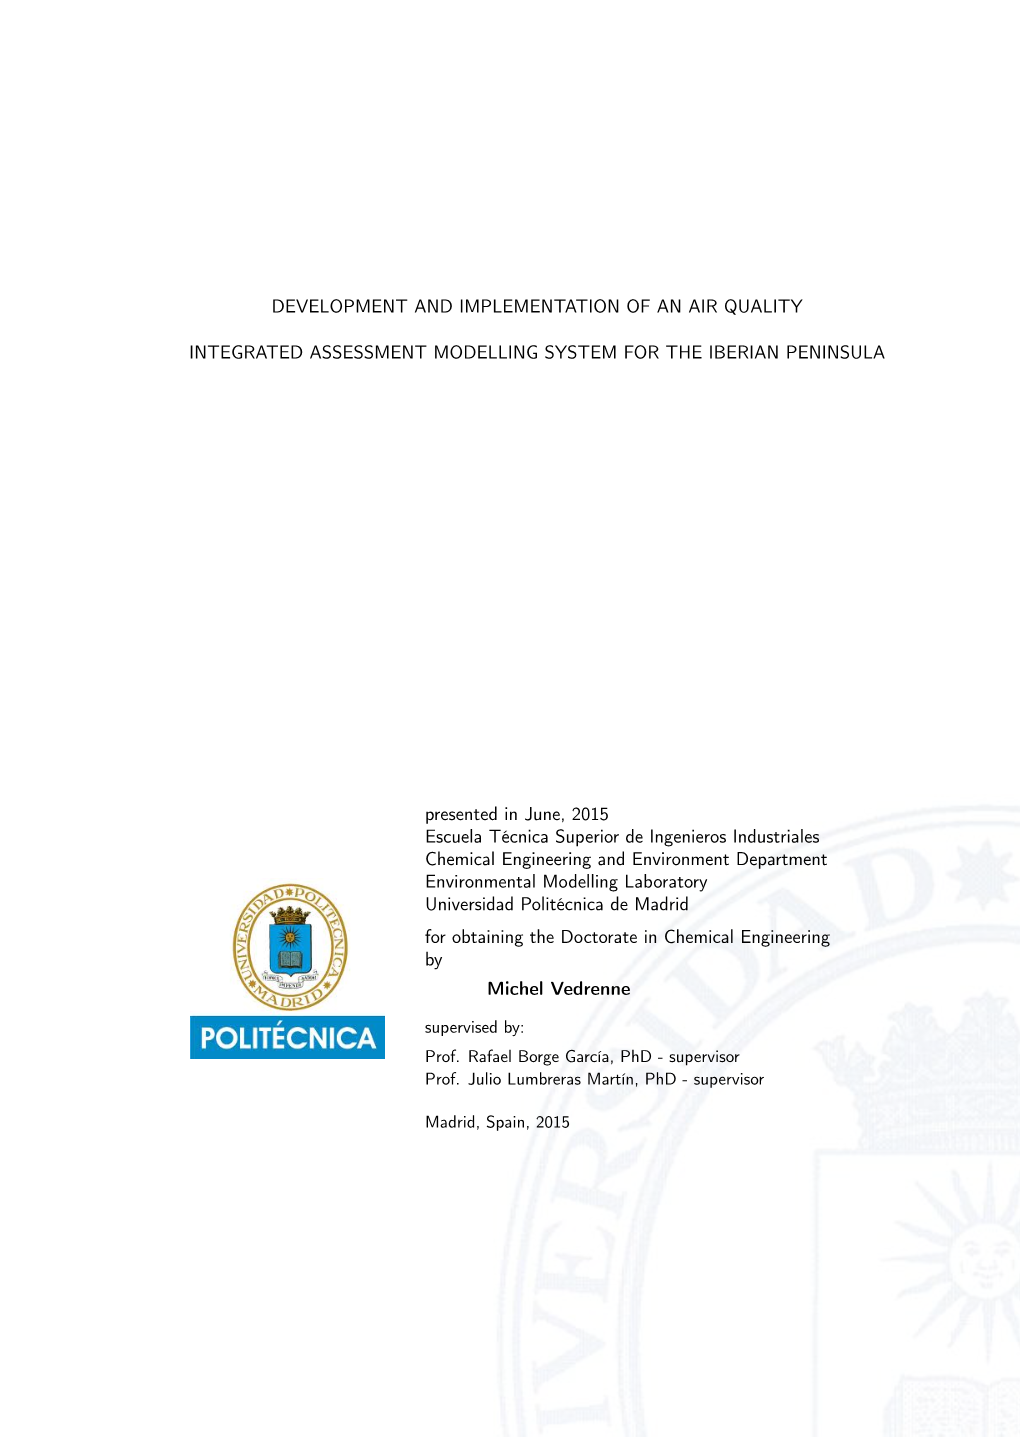 Development and Implementation of an Air Quality